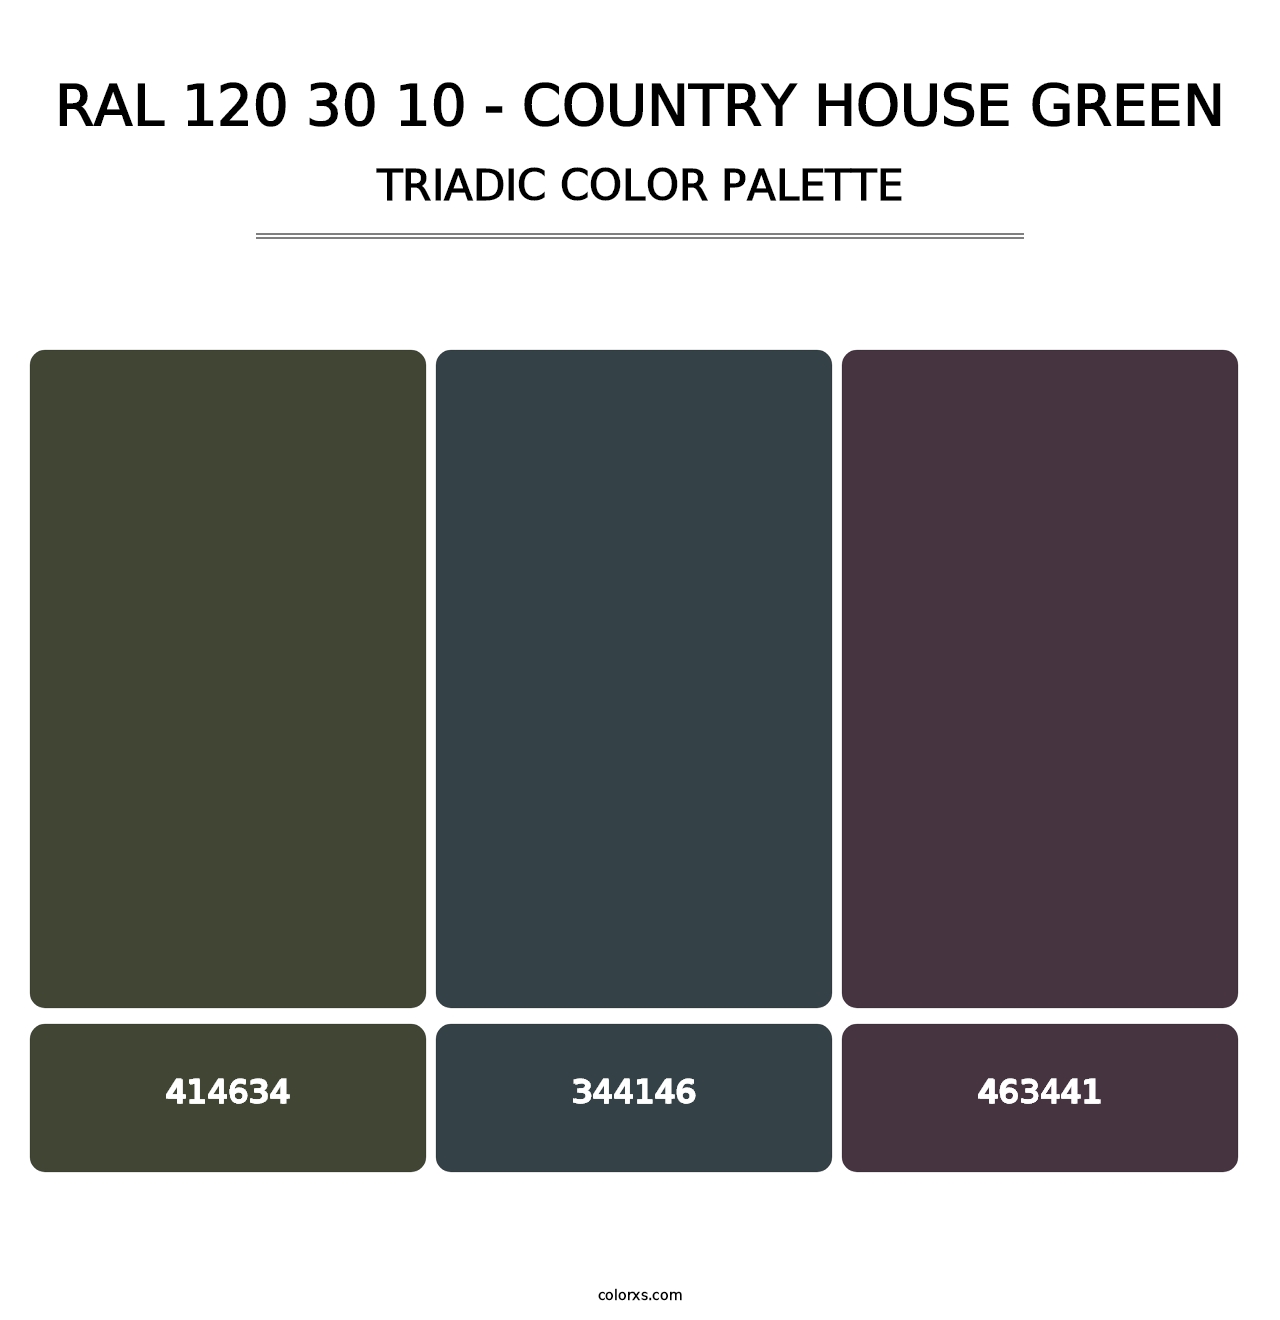 RAL 120 30 10 - Country House Green - Triadic Color Palette